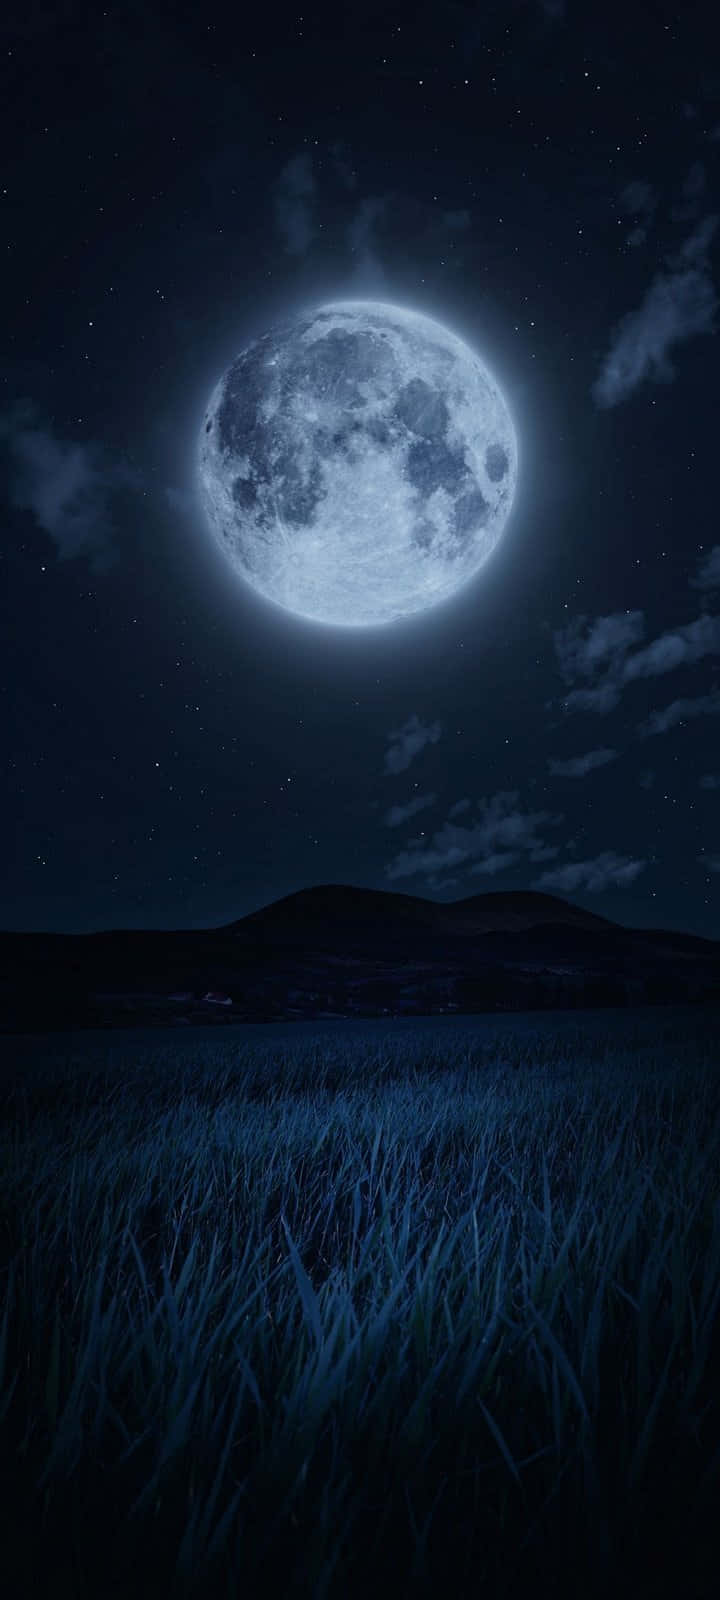 Get lost in the beauty and mystery of a moonlit night. Wallpaper